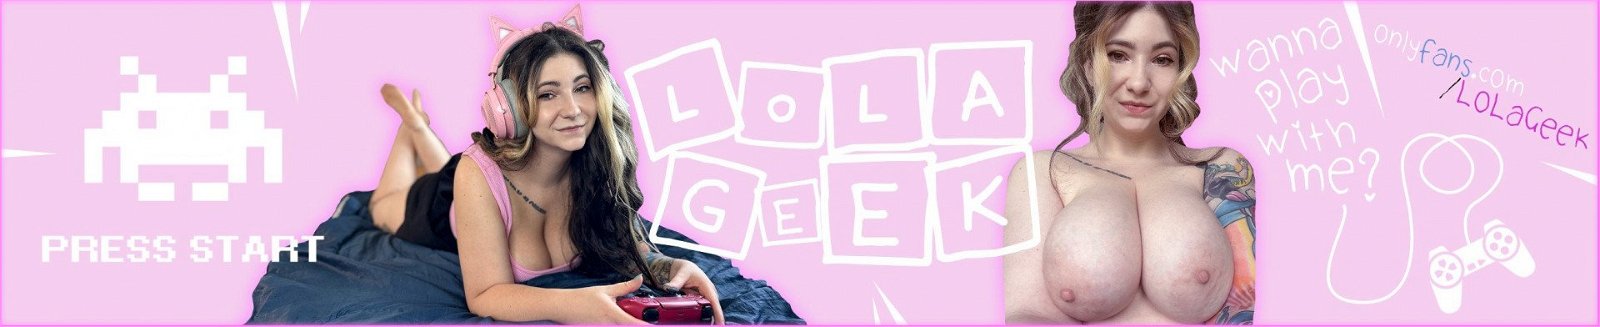 Cover photo of LolaGeek